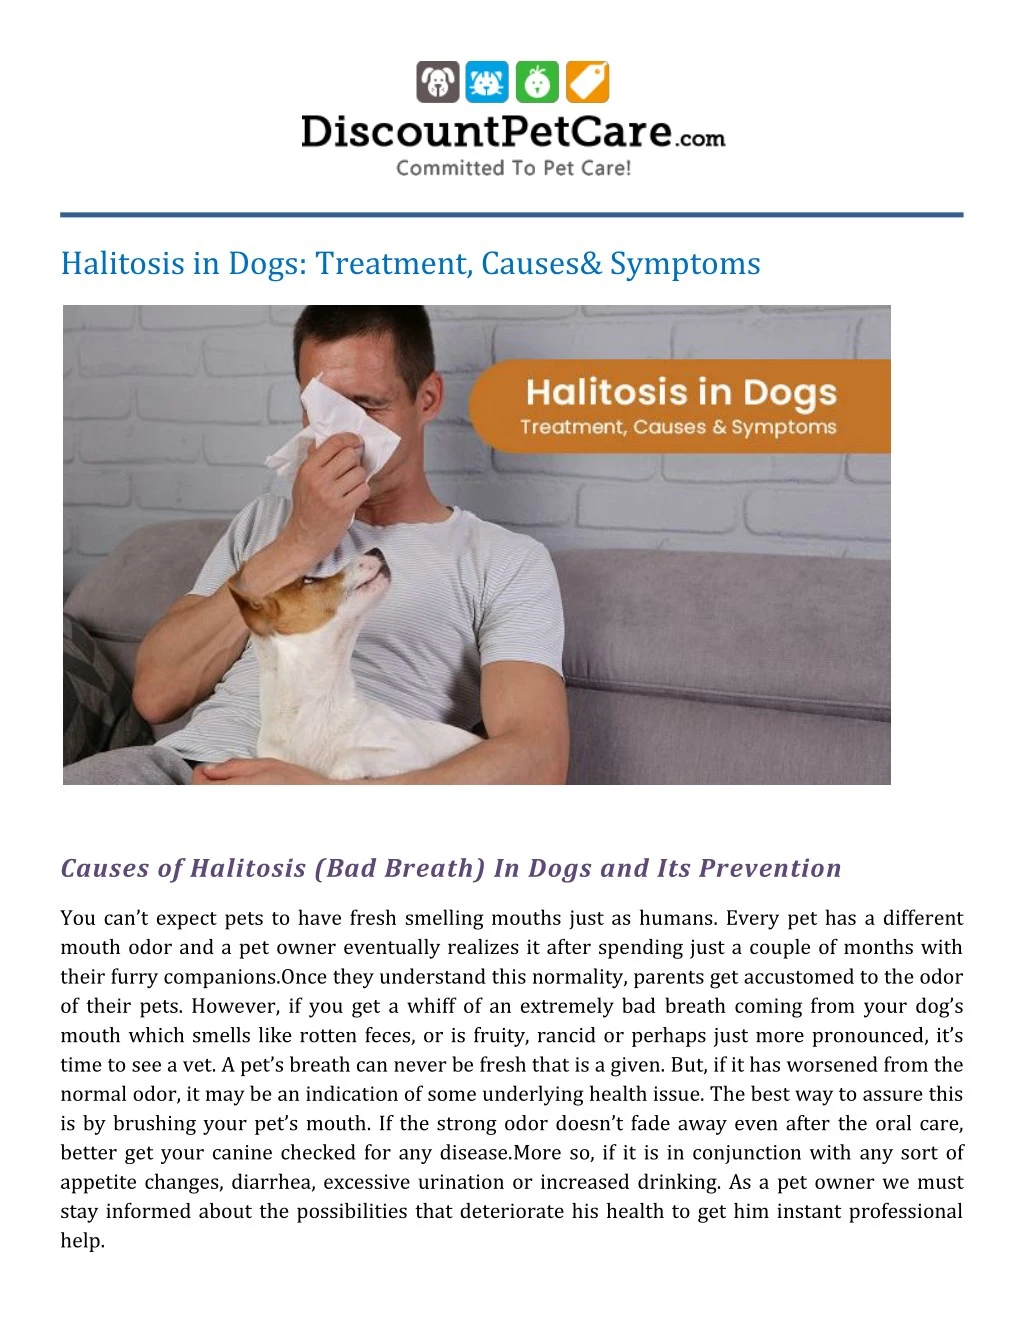 halitosis in dogs treatment causes symptoms